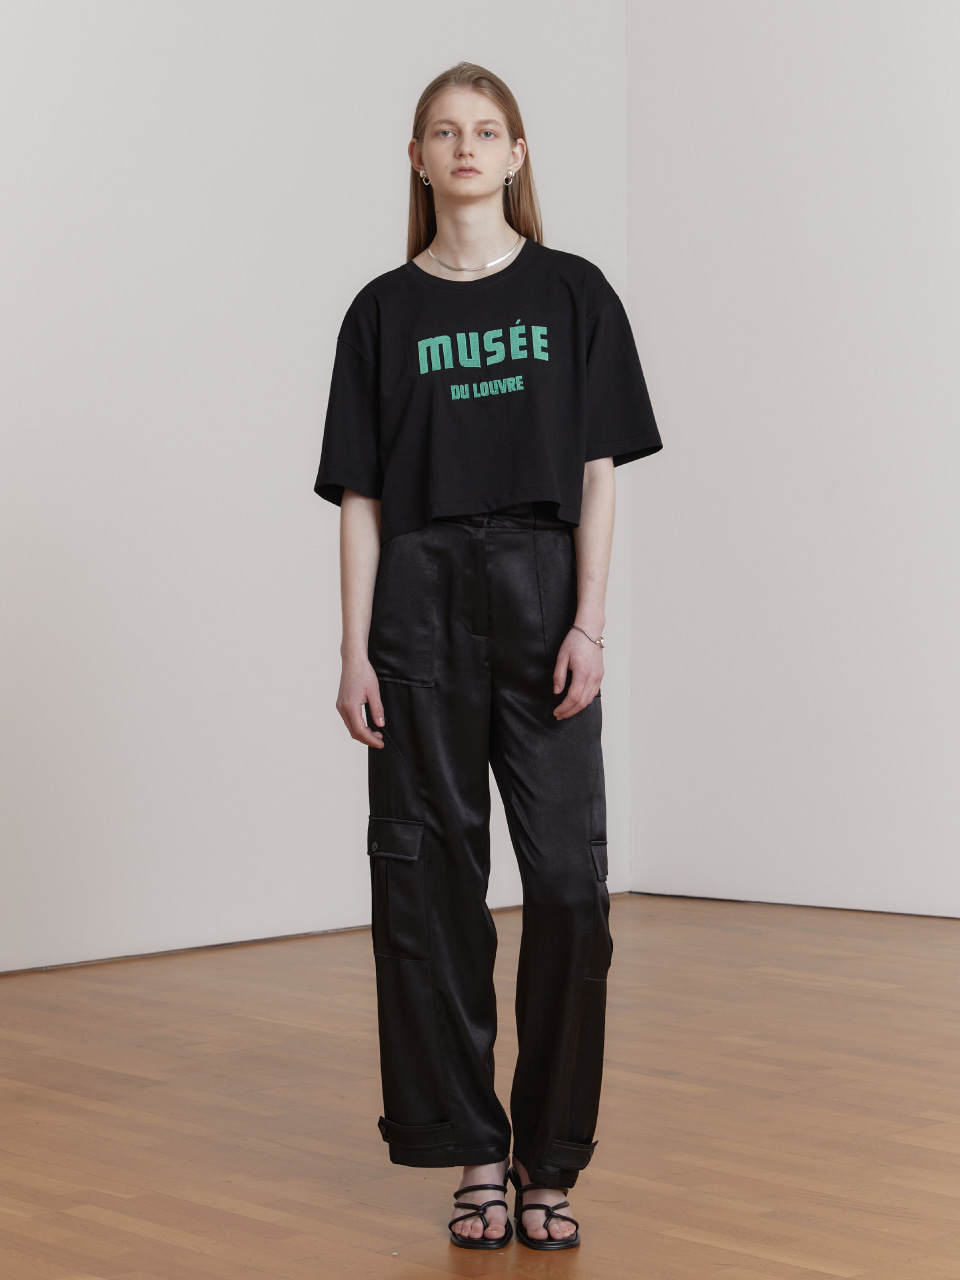 MUSEE DU LOUVRE Embroidered Cotton T-Shirt_Black